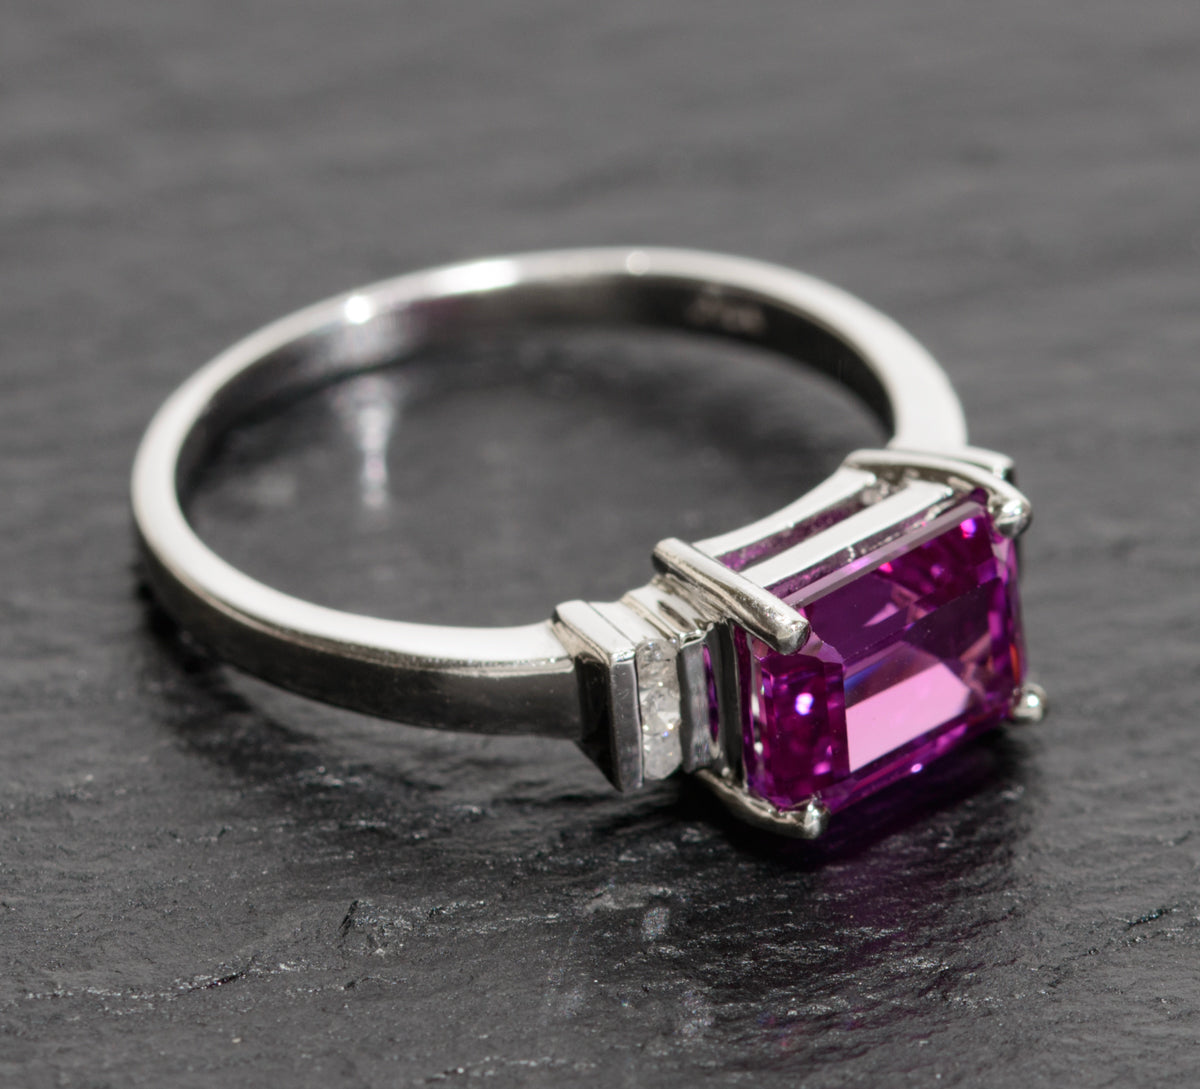 10K White Gold & Emerald Cut Pink Sapphire Ring With Diamond Accents UK Size O (A1738)